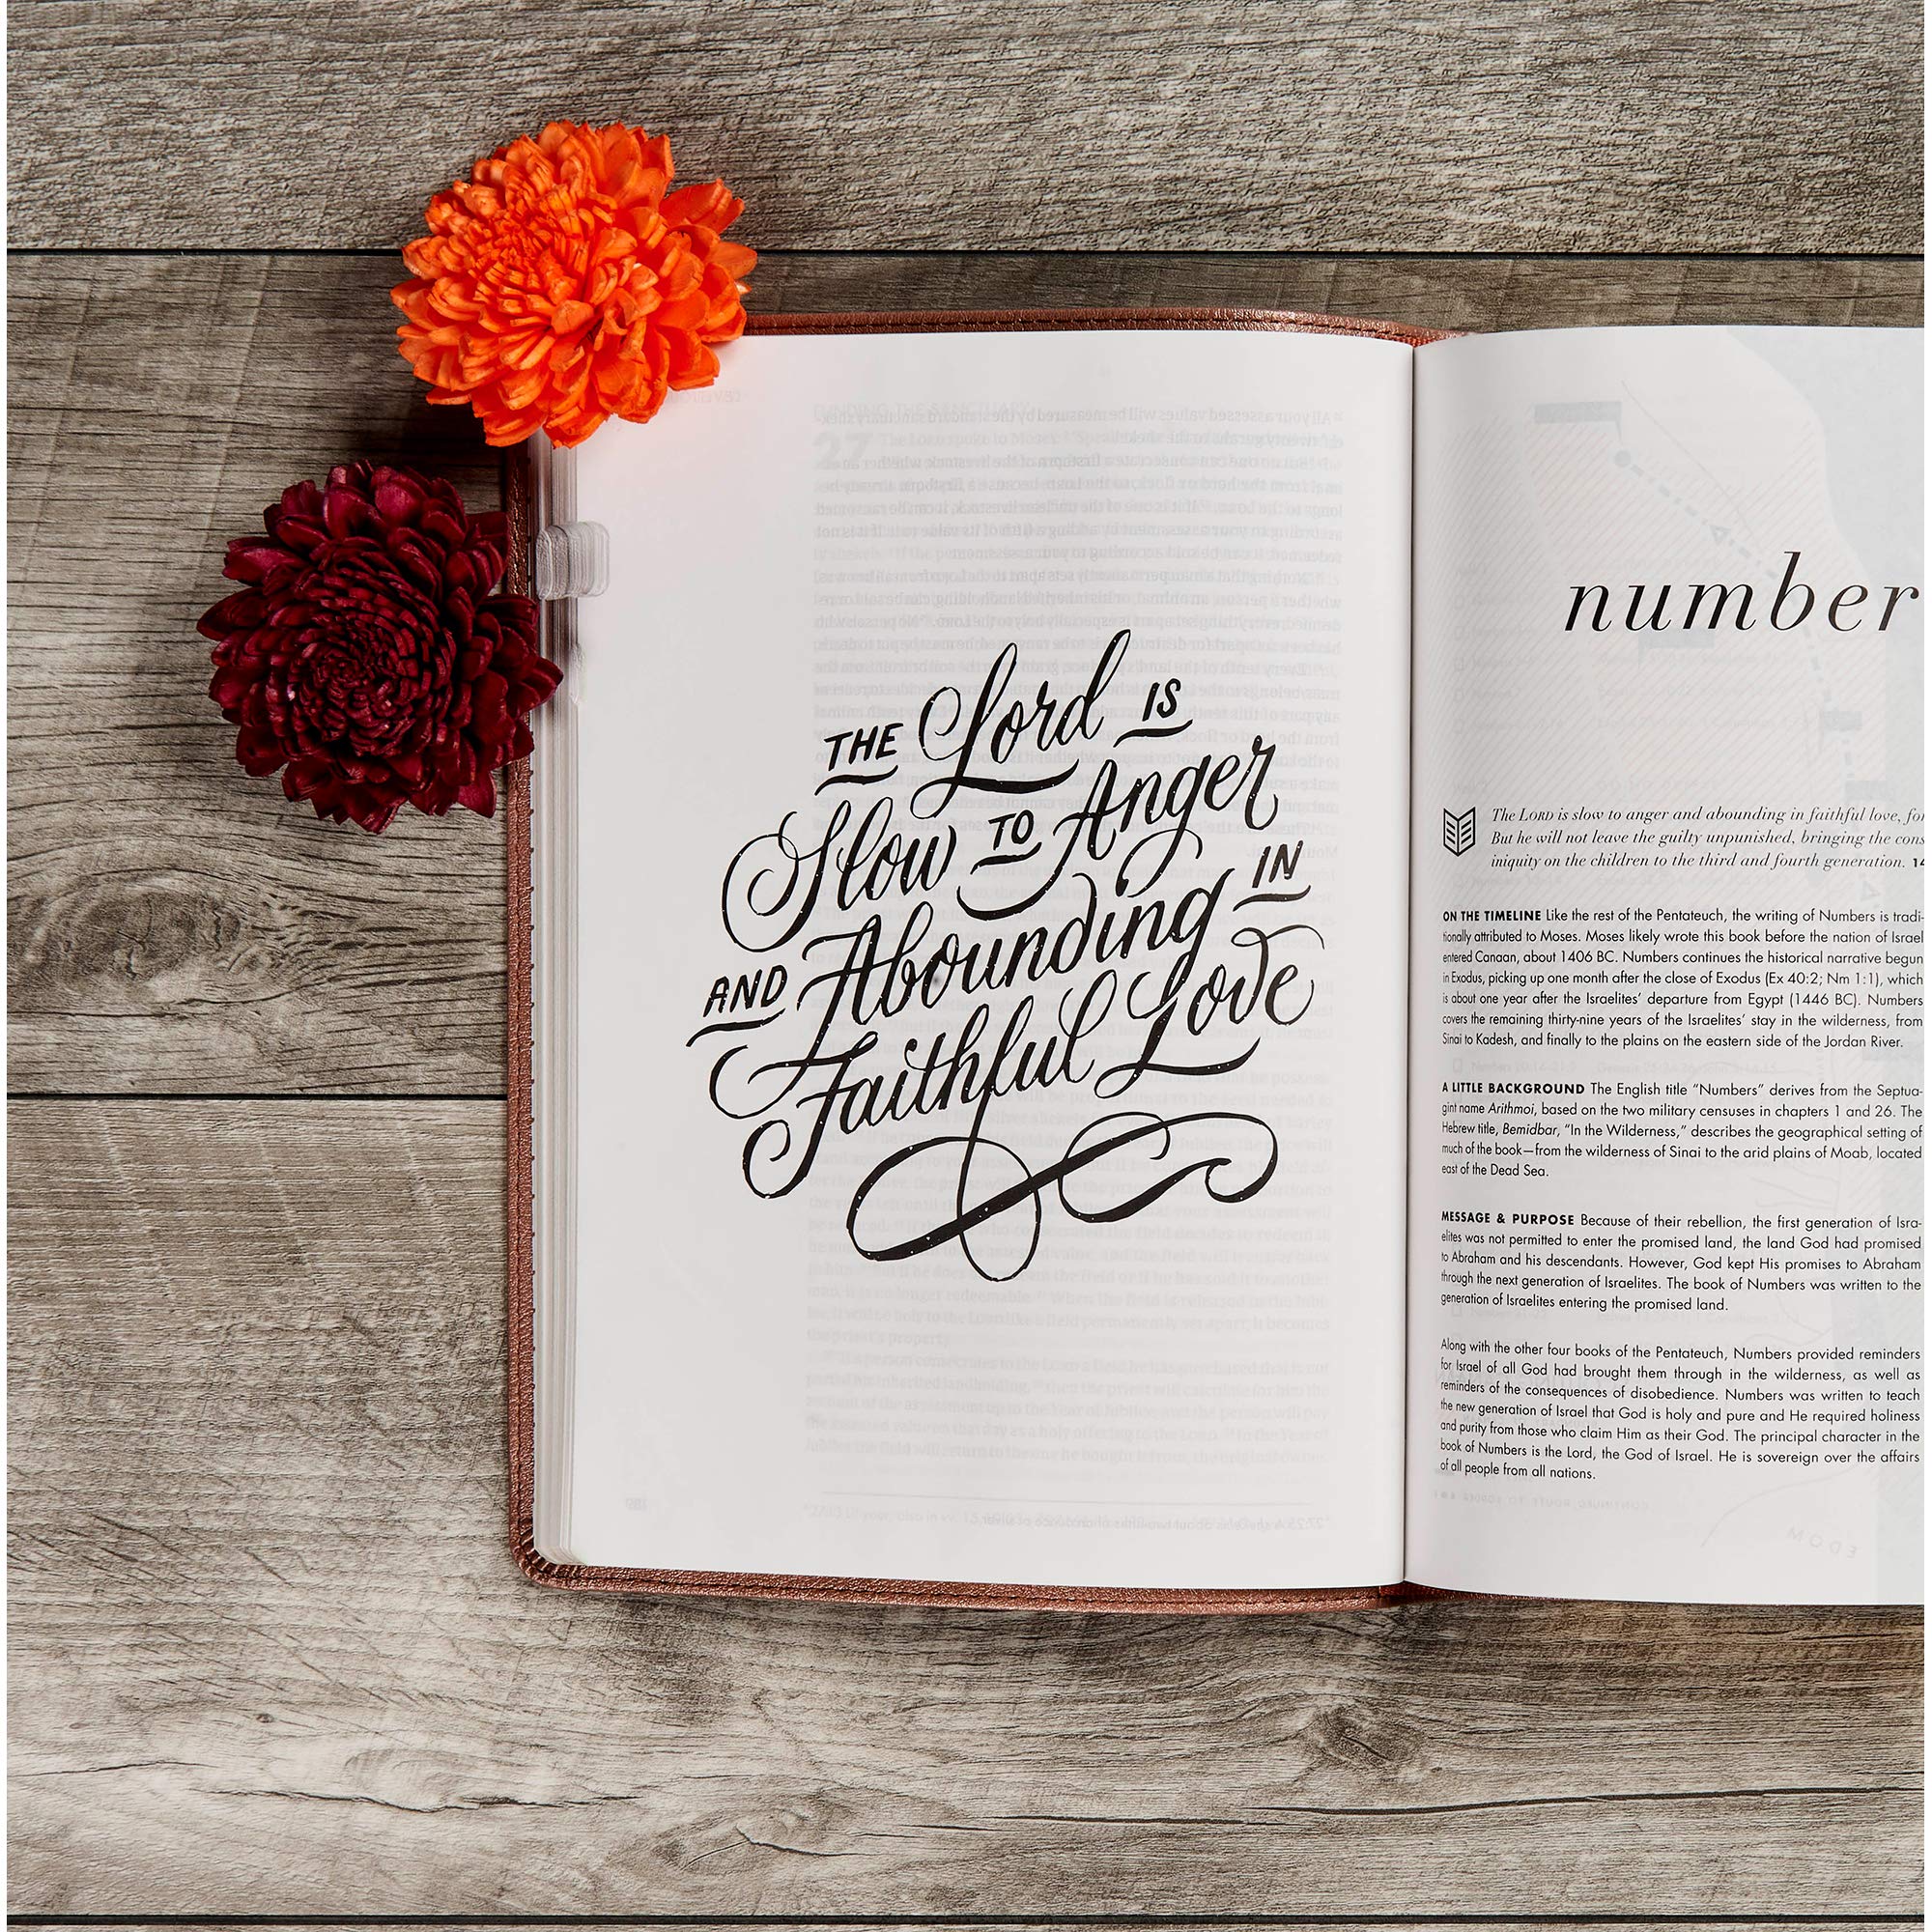 CSB She Reads Truth Bible, Rose Gold LeatherTouch, Indexed, Black Letter, Full-Color Design, Wide Margins, Journaling Space, Devotionals, Reading Plans, Single-Column, Easy-to-Read Bible Serif Type